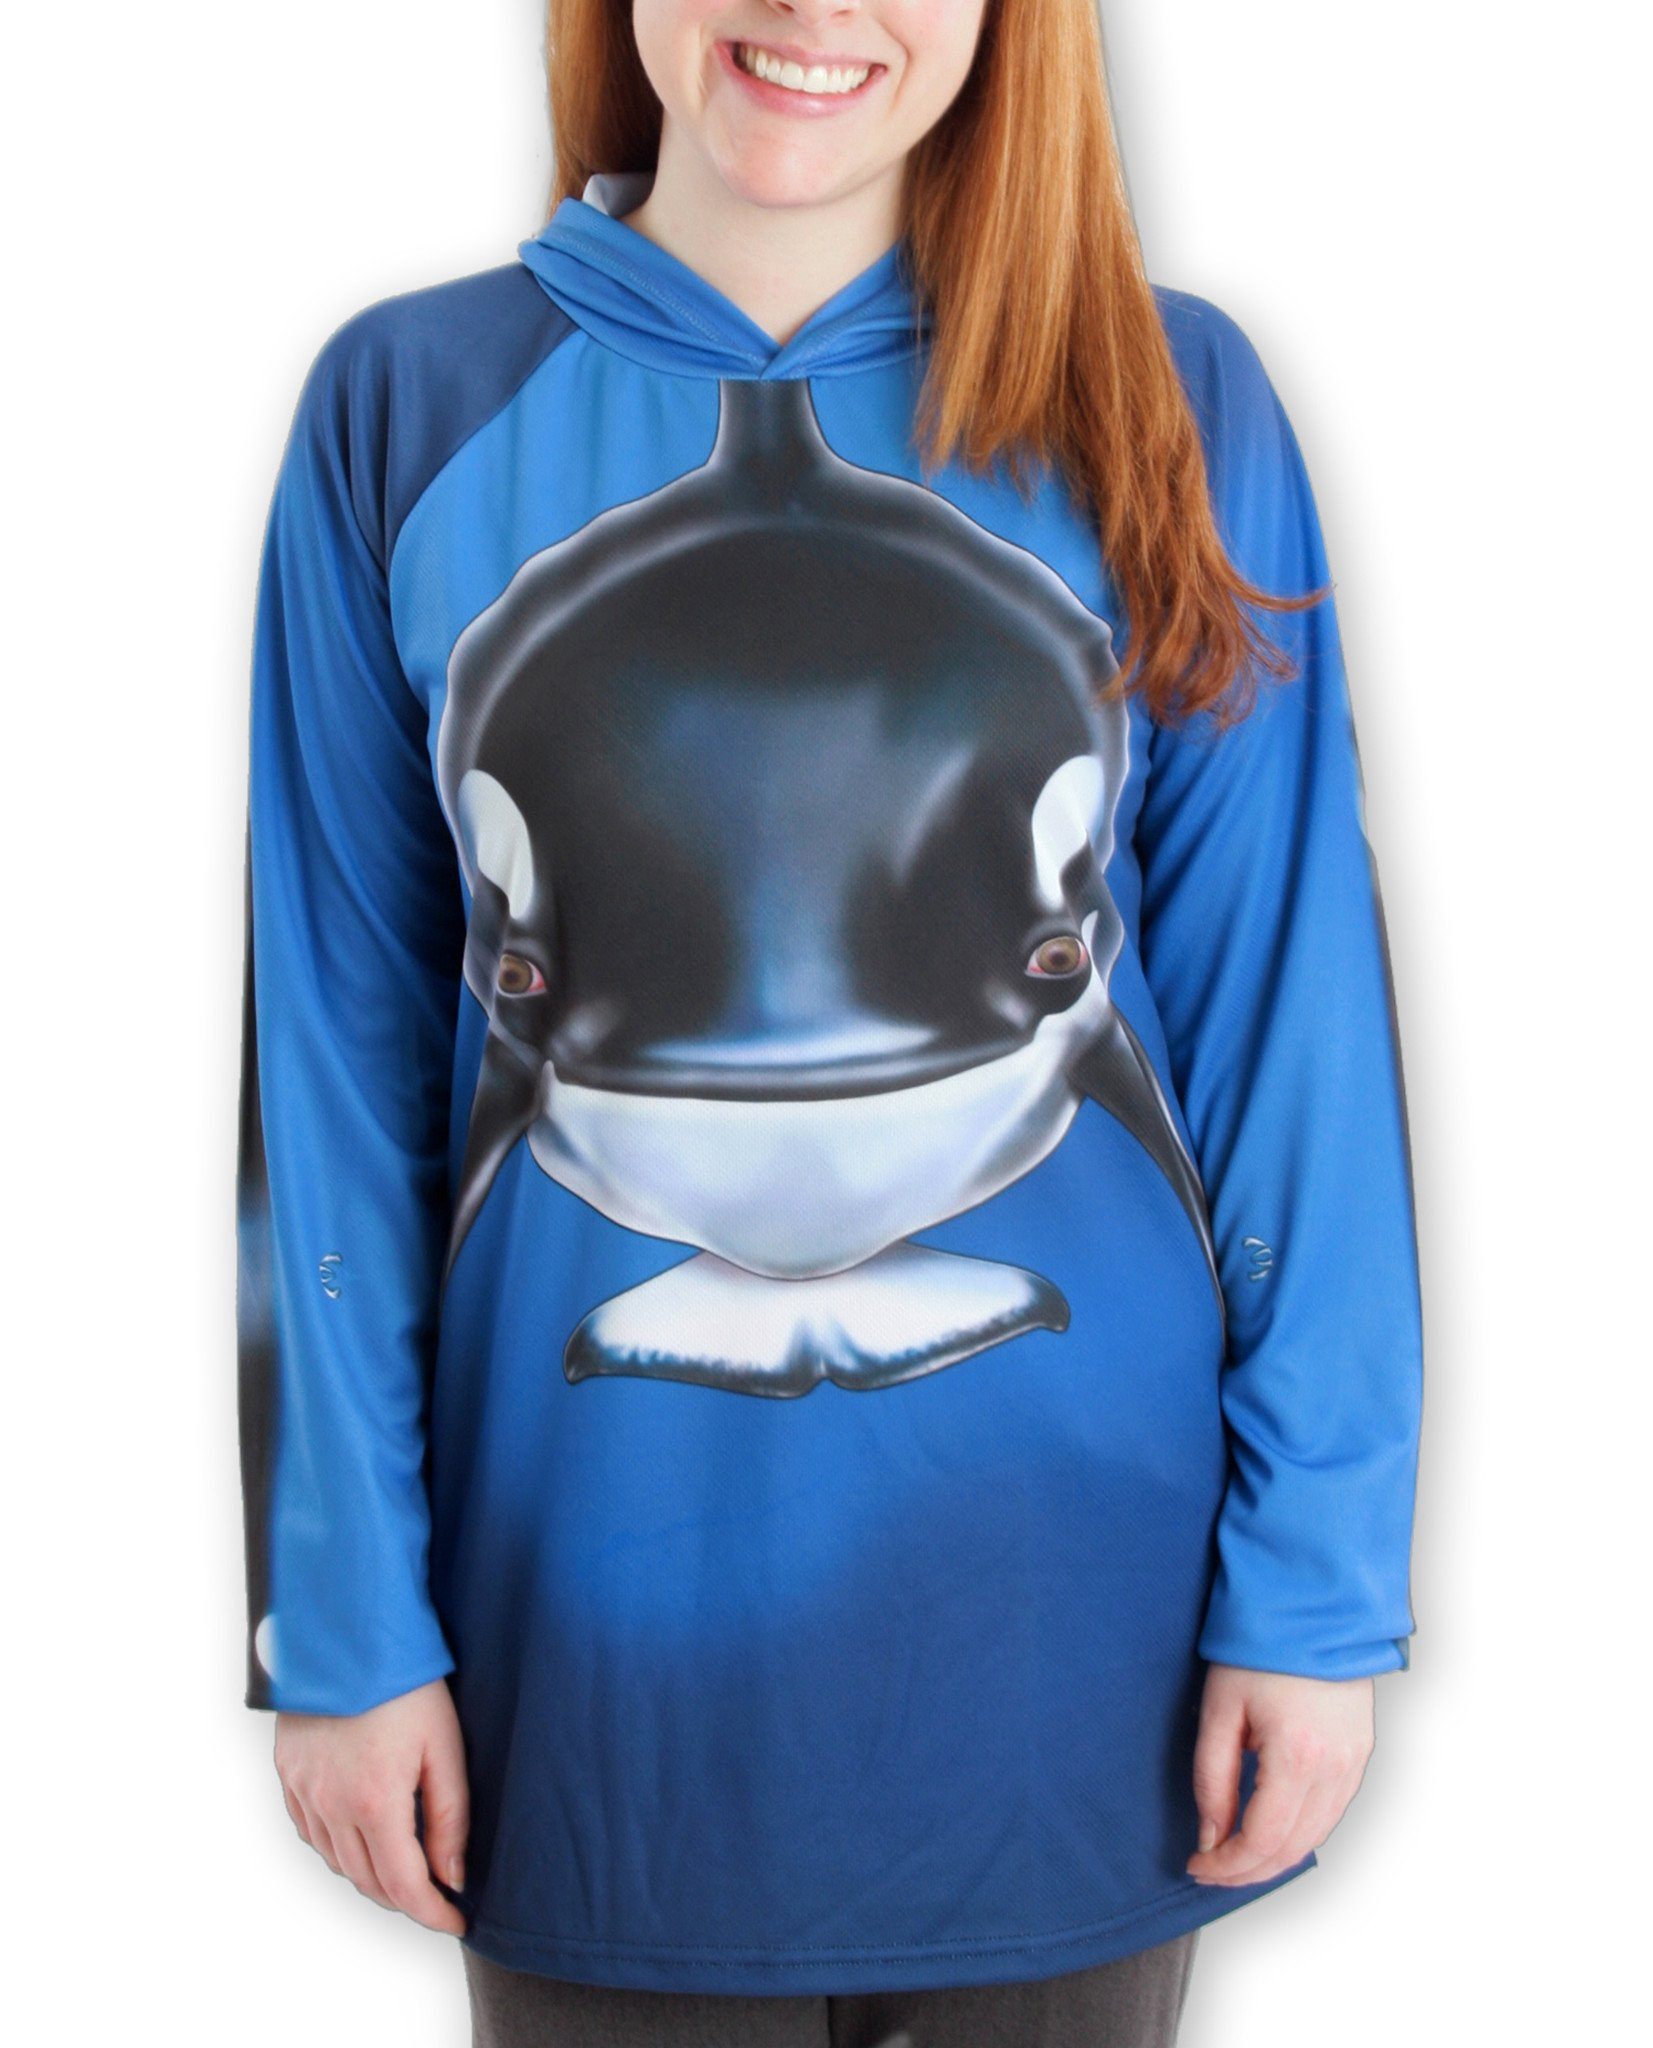 ORCA WHALE Hoodie Sport Shirt by MOUTHMAN® Kid's Clothing 